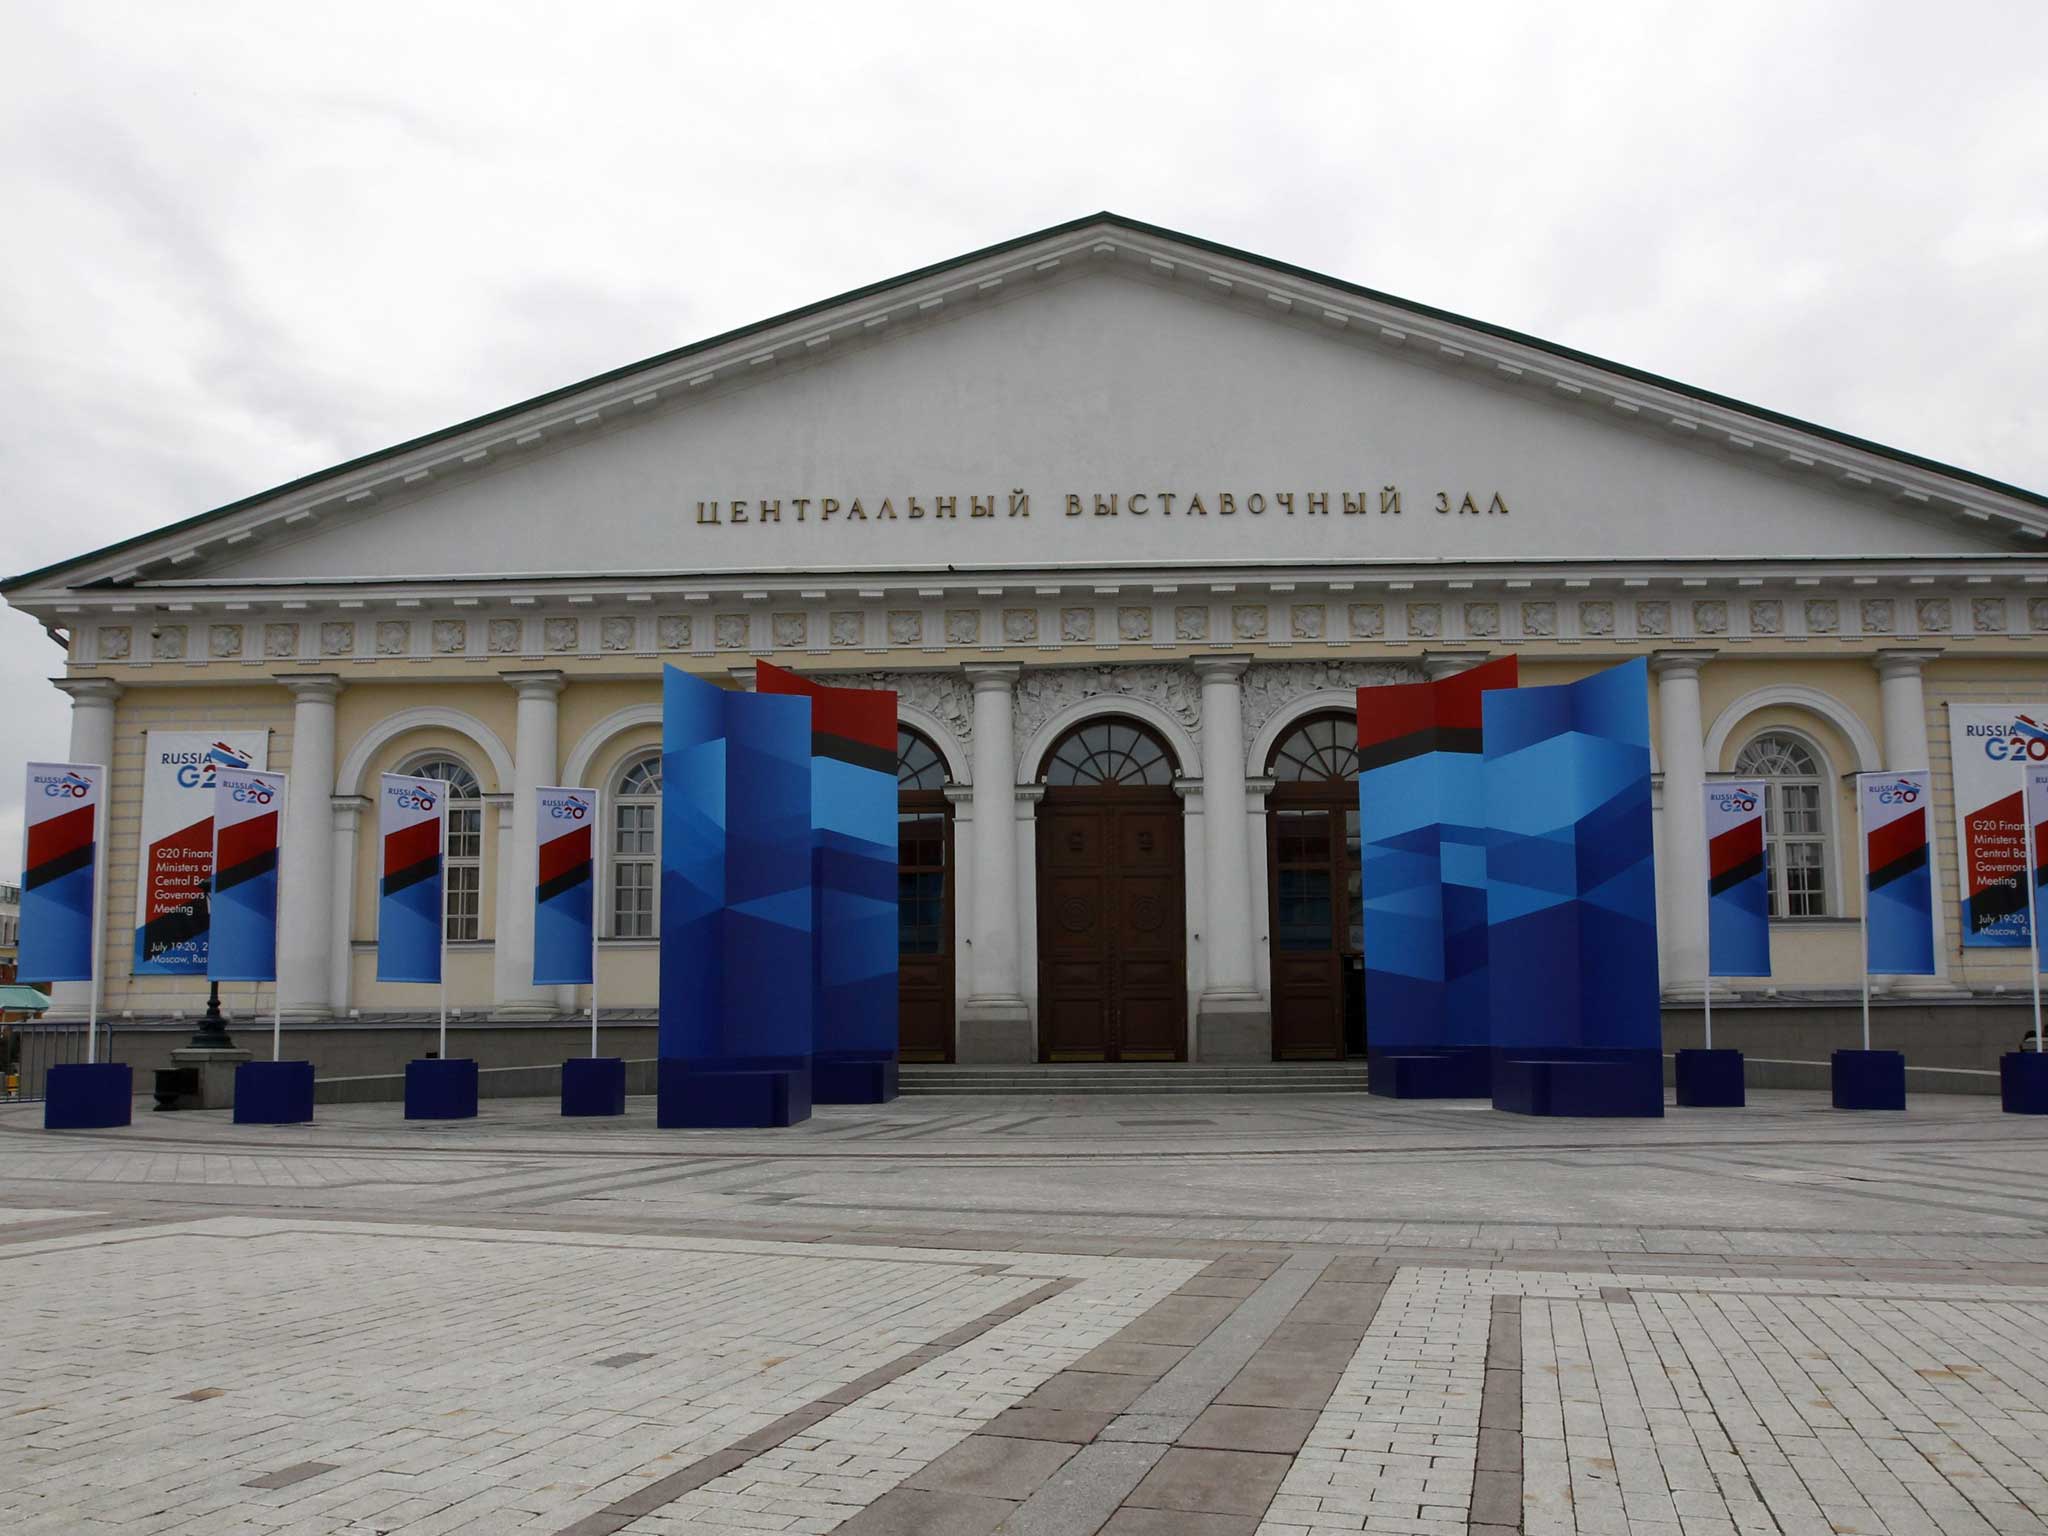 The Manezh Exhibition Center - the venue for this week's meeting of G20 Finance Ministers in Moscow